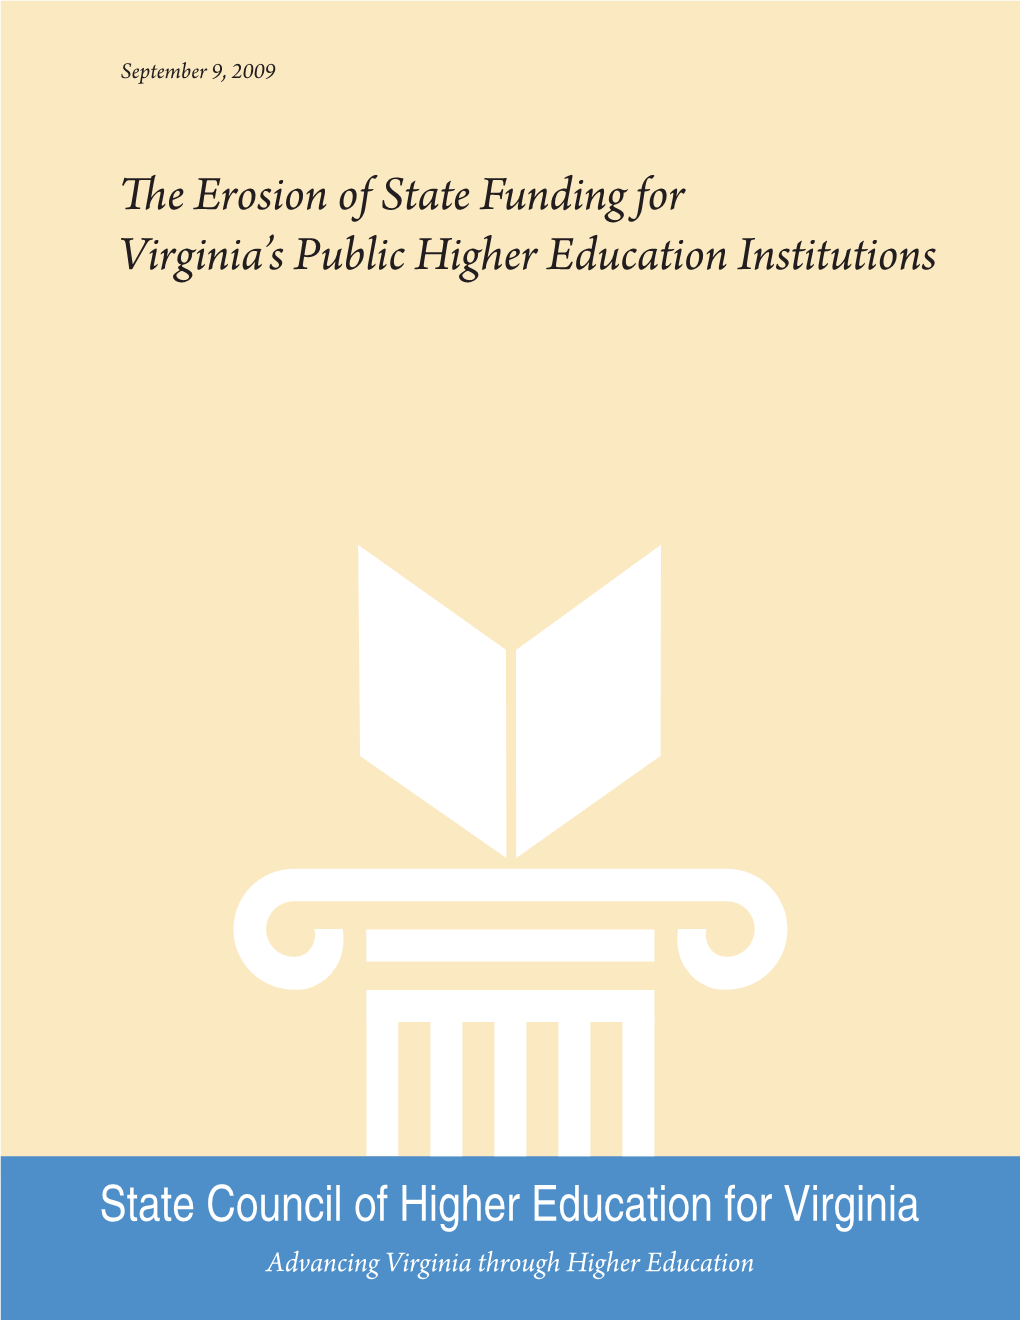 E Erosion of State Funding for Virginia's Public Higher Education